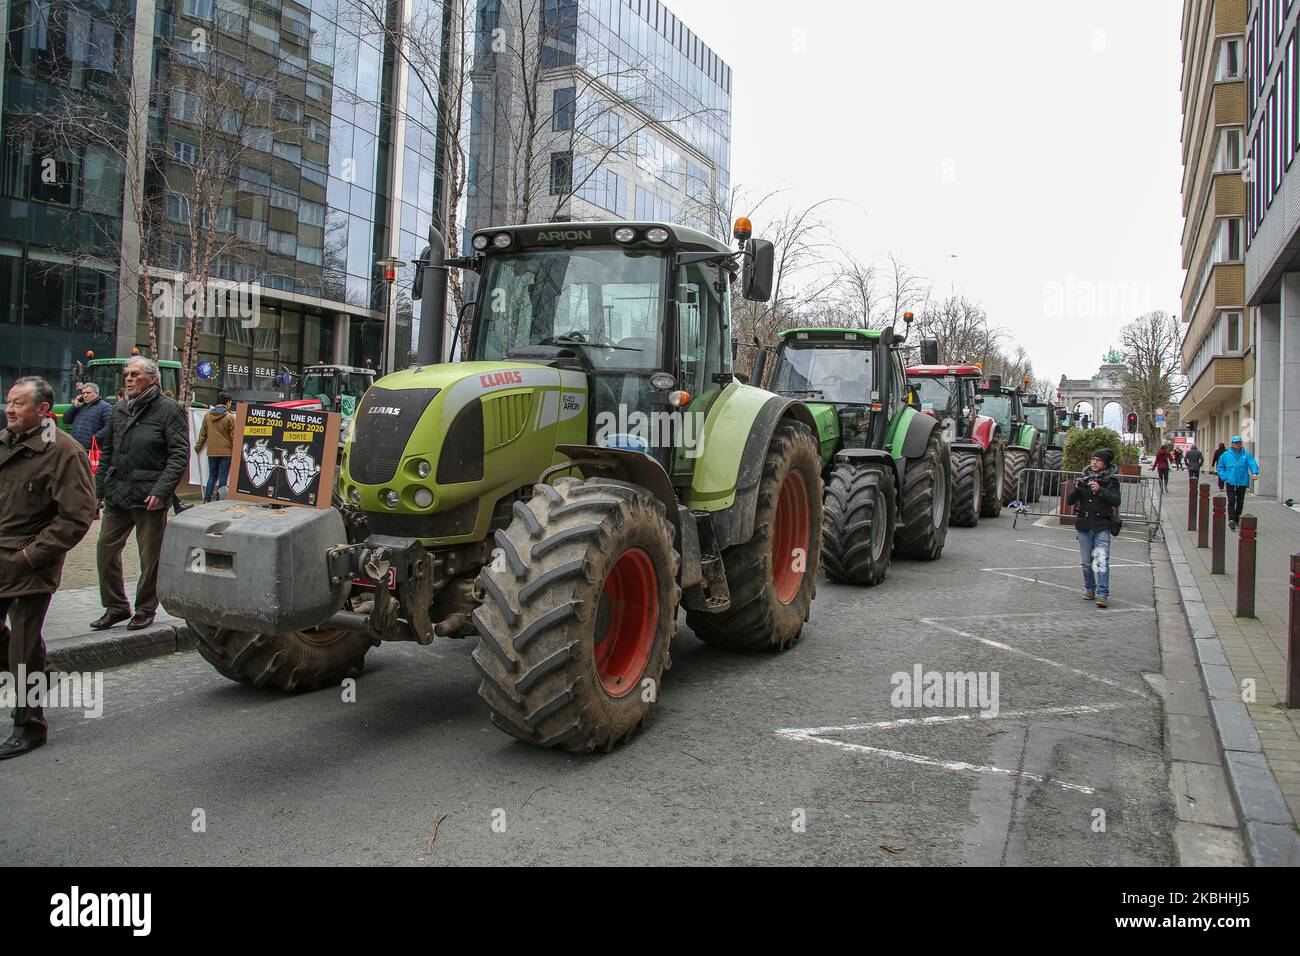 Farmers and European milk producers gather during a rally with the support of 150 tractors, they protest in front of the EU Headquarters around Schumanplein ahead and during of a special European Council summit, meeting of EU leaders on February 20, 2020 in Brussels, Belgium. The demonstration of the farmers in the capital of Belgium, Brussels is supported by the Wallon agricultural federation FWA, the Federation des Jeunes Agriculteurs and also the Flemish delegations of the Boerenbond, the General Farmer's Syndicate ABS and the young farmers of the Groene Kring. Farmers don't agree on the ne Stock Photo